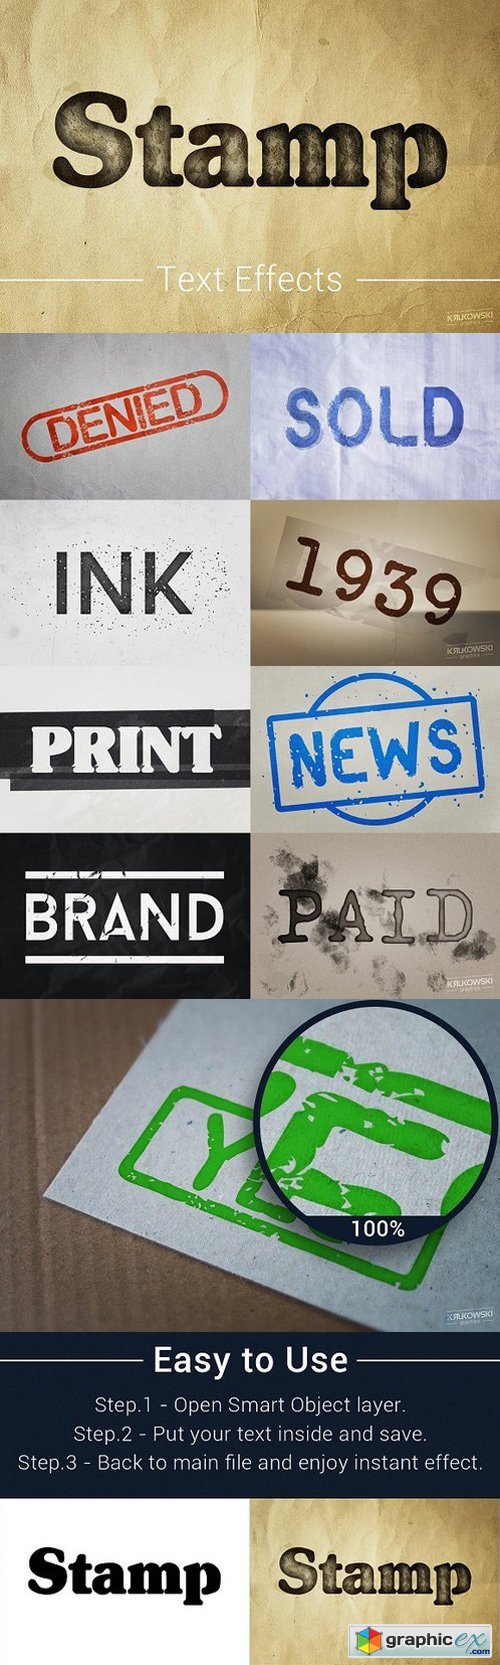 Stamp Ink Text Effects Style